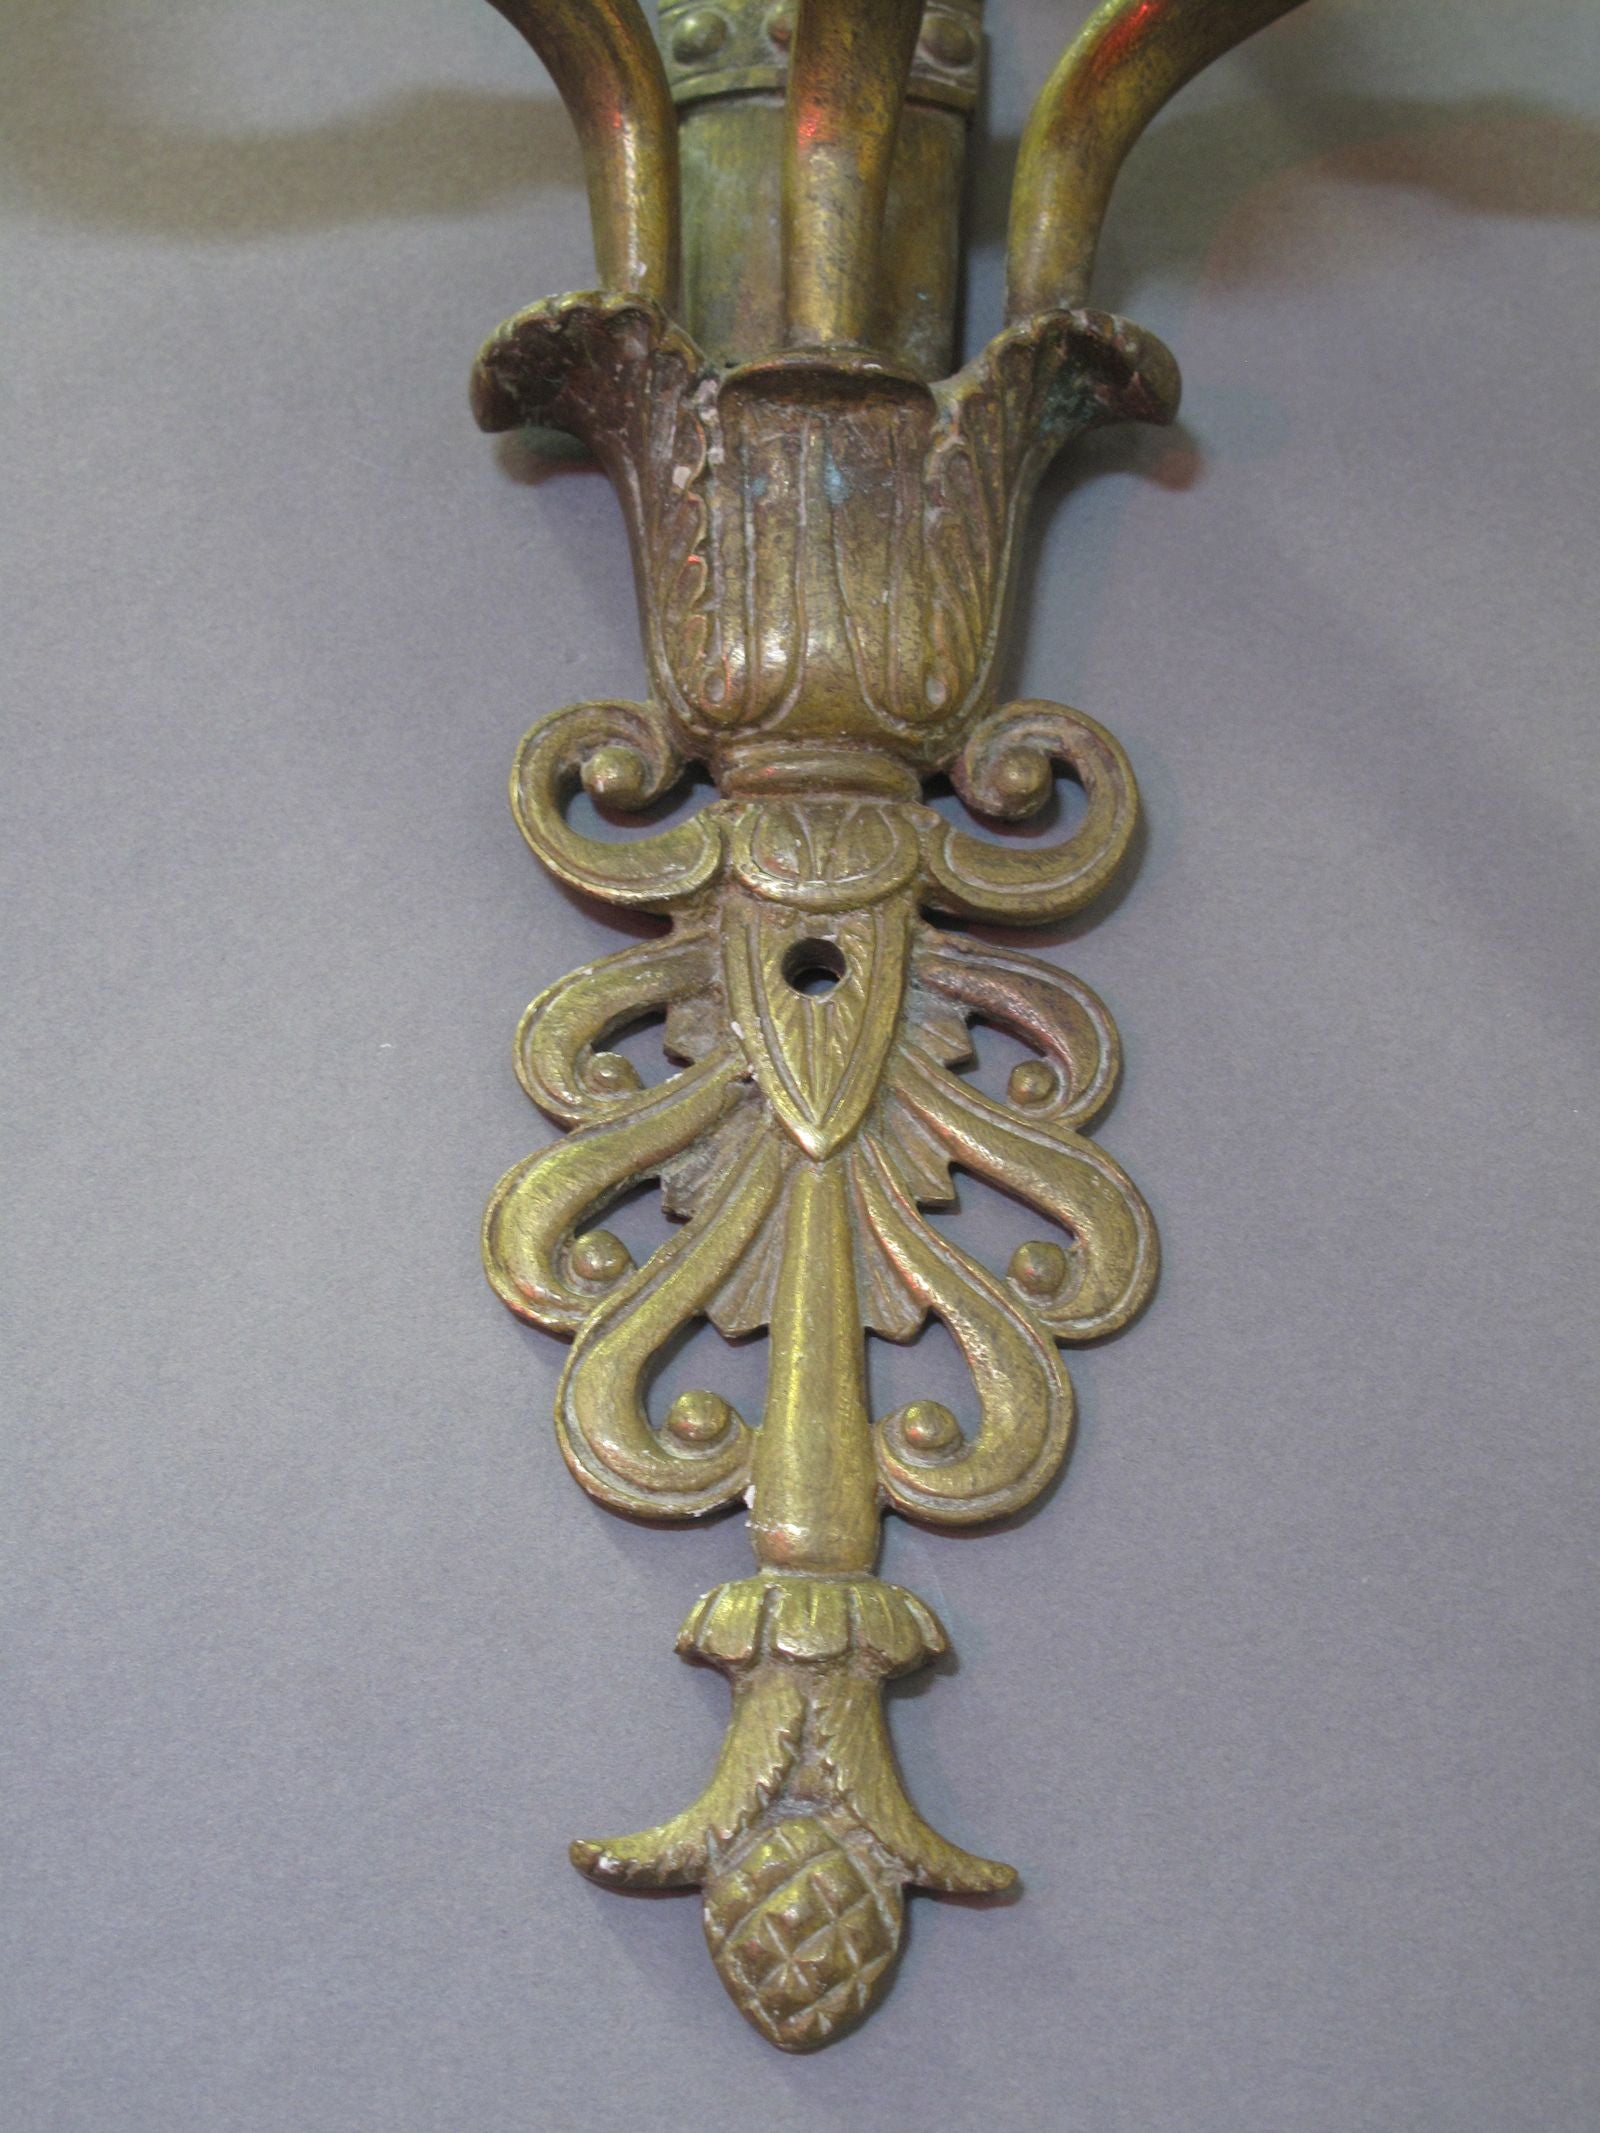 view of bottom part of wall light